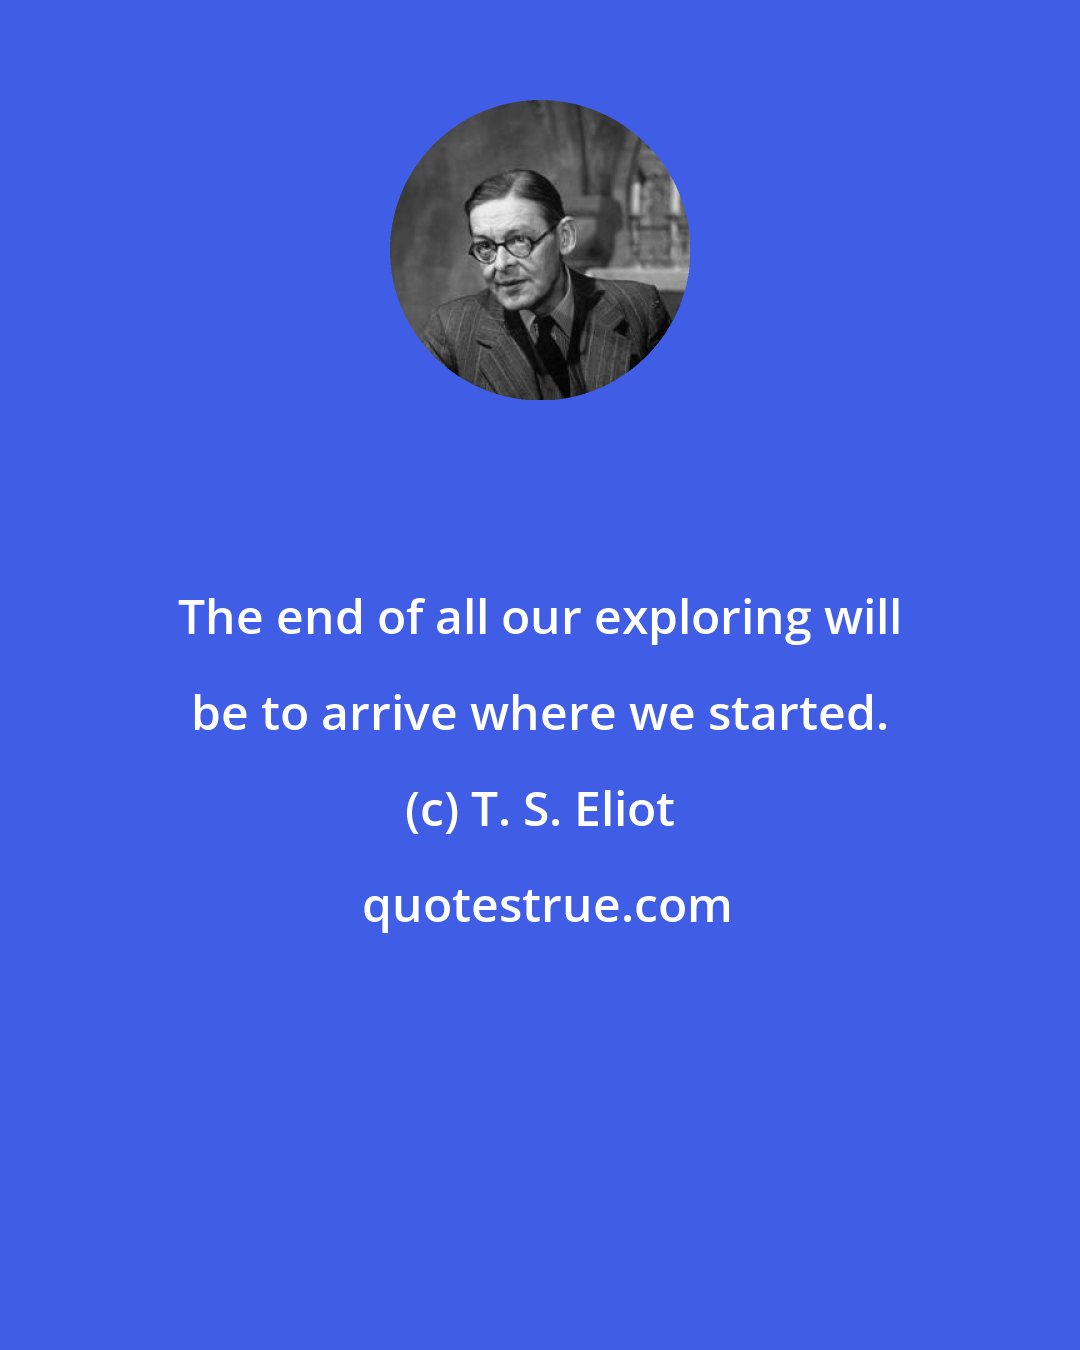 T. S. Eliot: The end of all our exploring will be to arrive where we started.